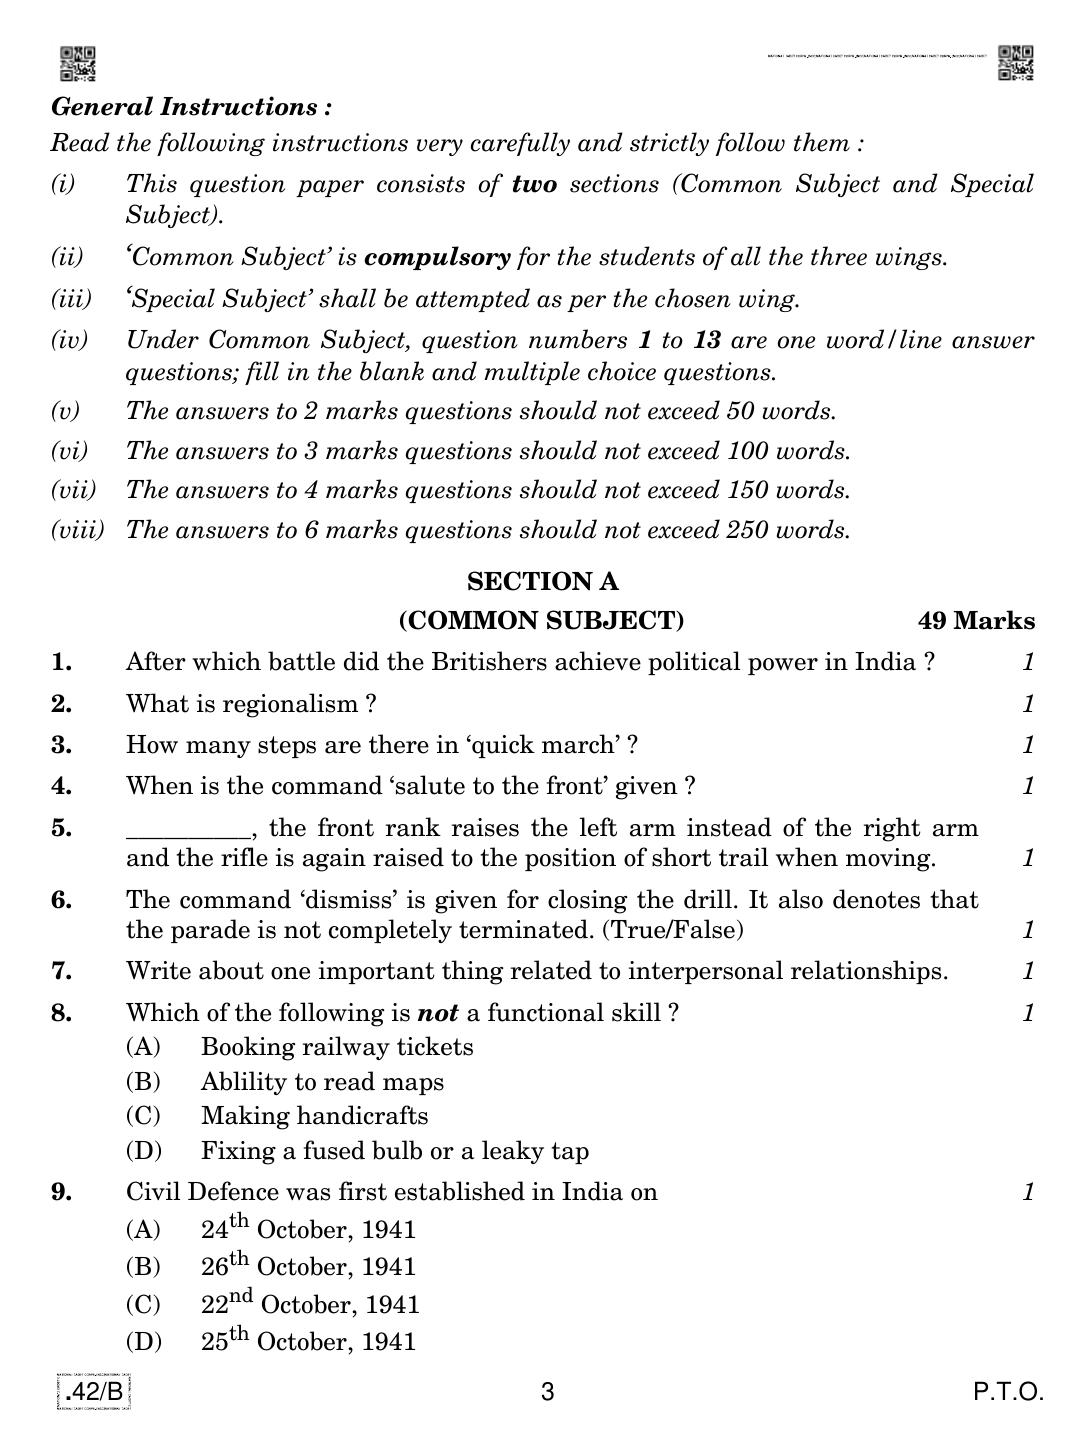 CBSE Class 12 NCC 2020 Compartment Question Paper - Page 3